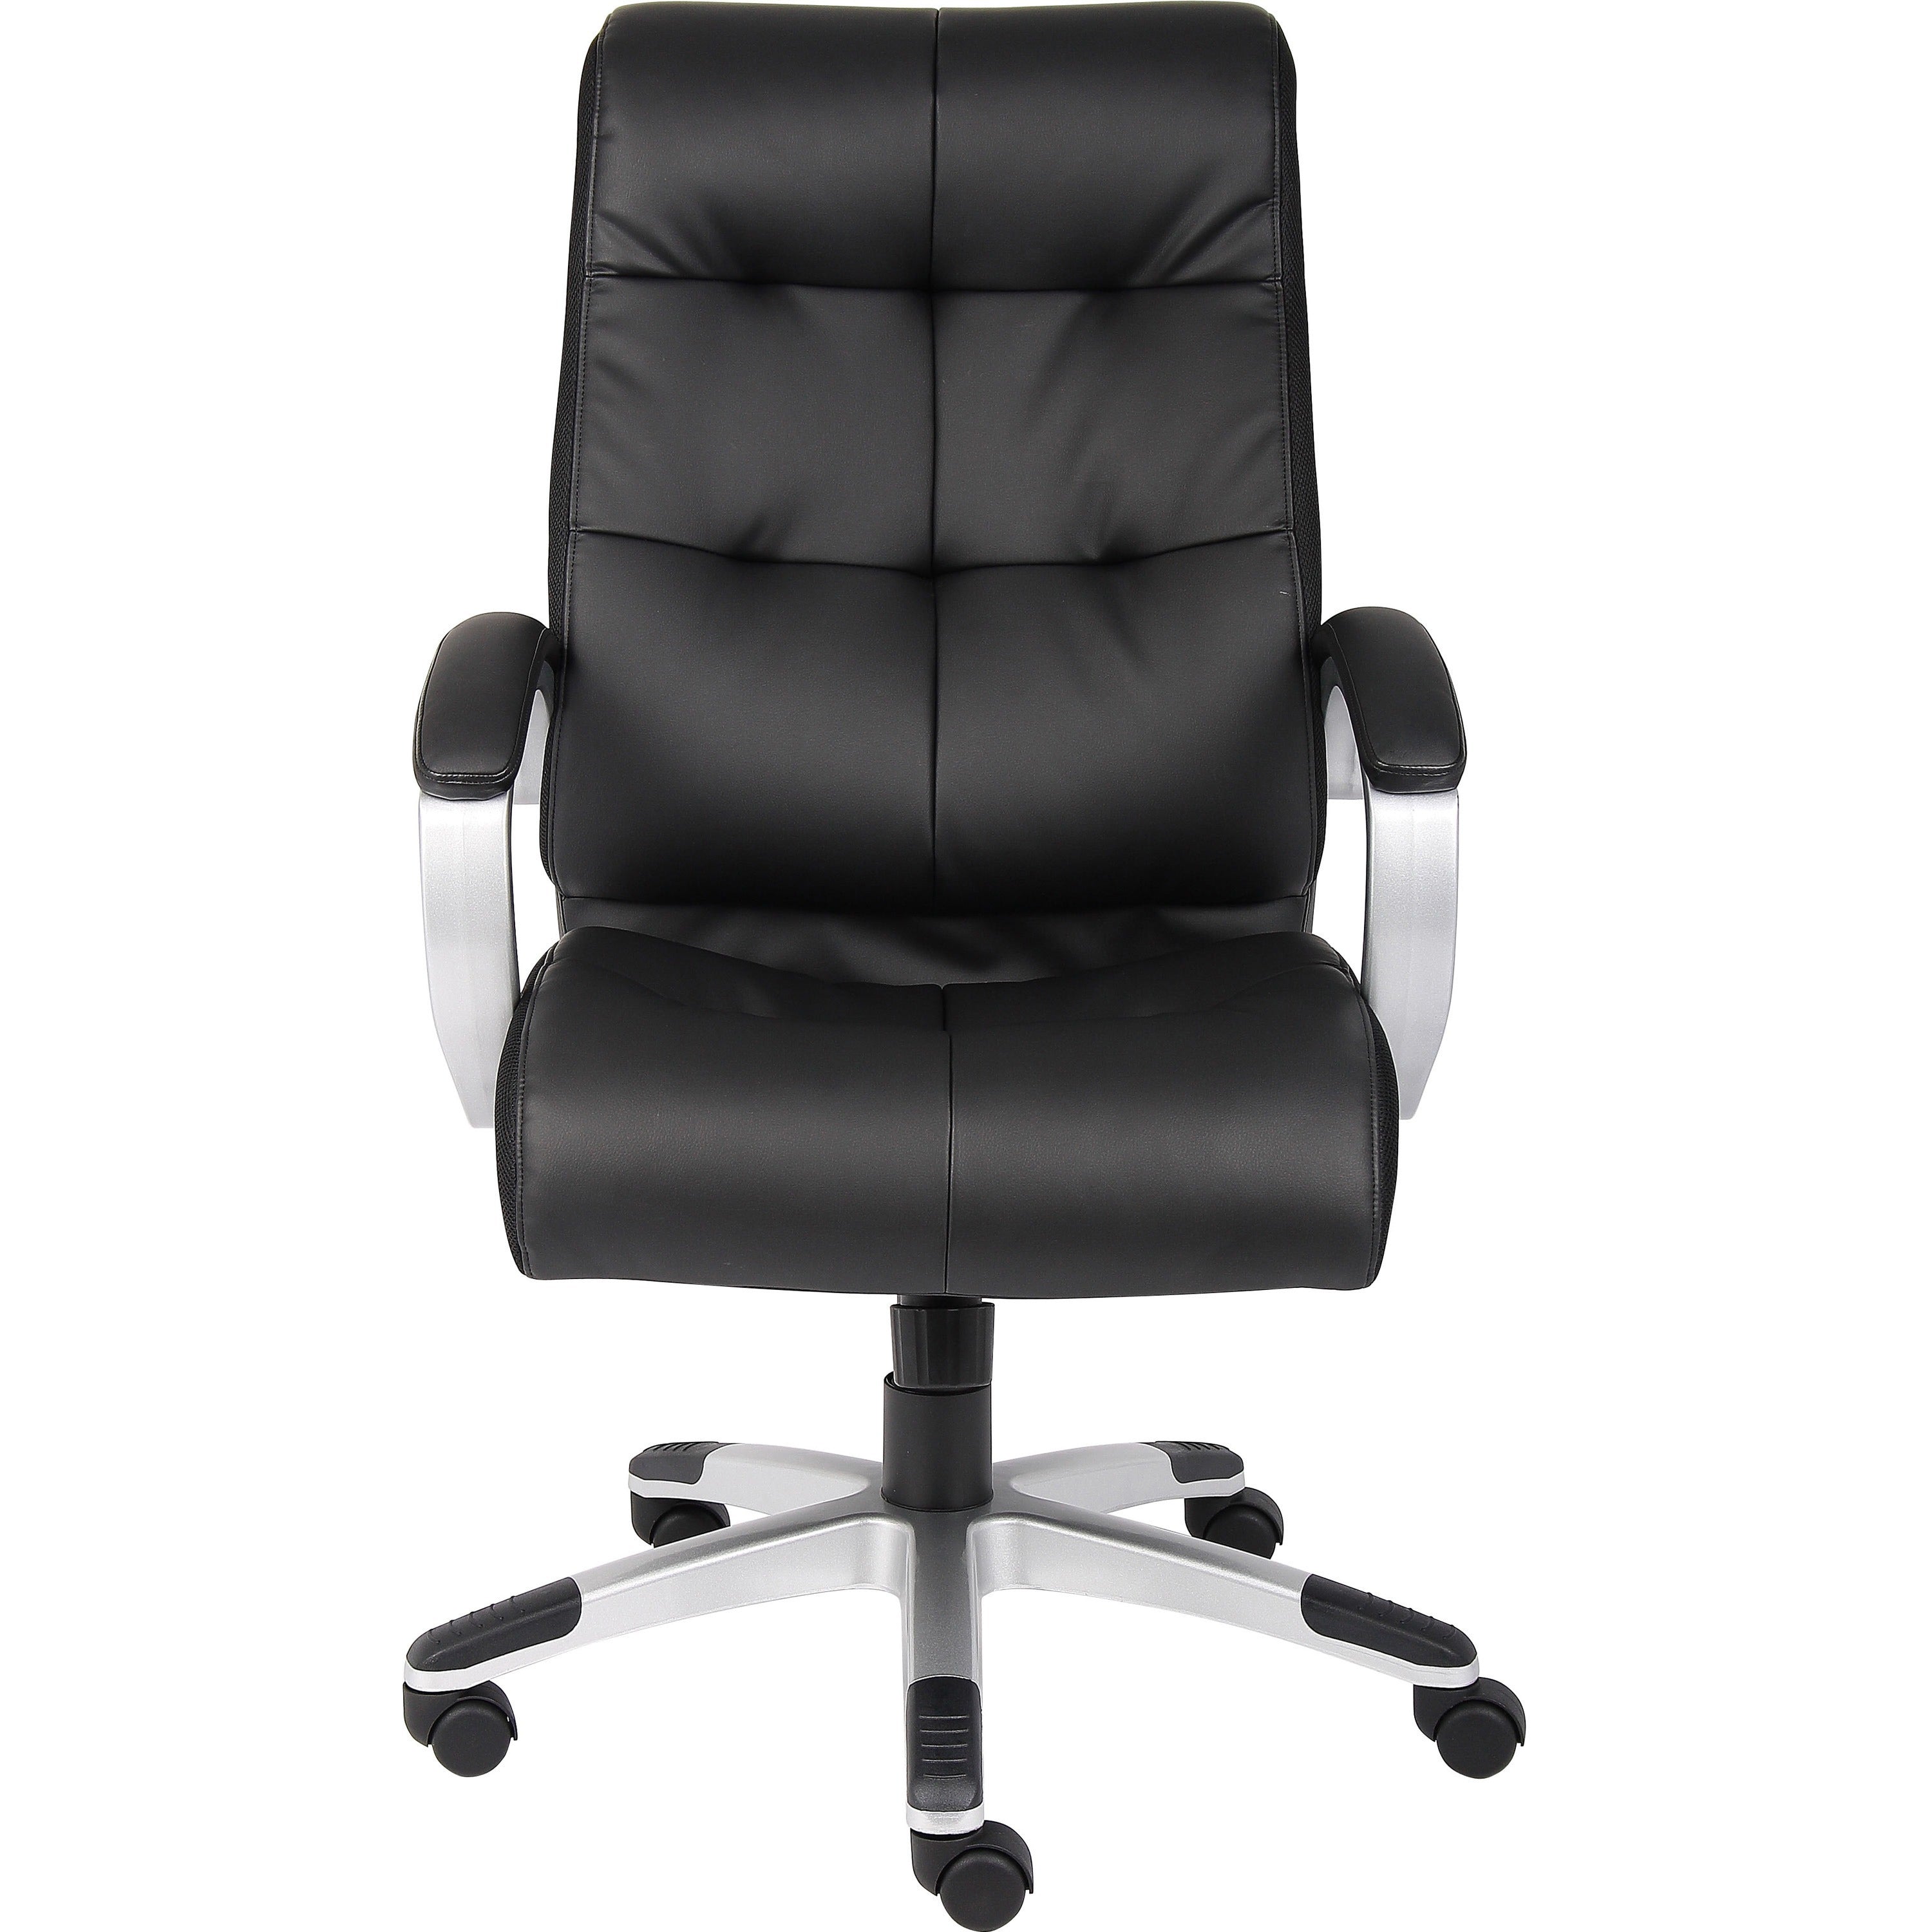 Lorell Classic Executive Office Chair - Black Leather Seat - 5-star Base - Black - 1 Each - 